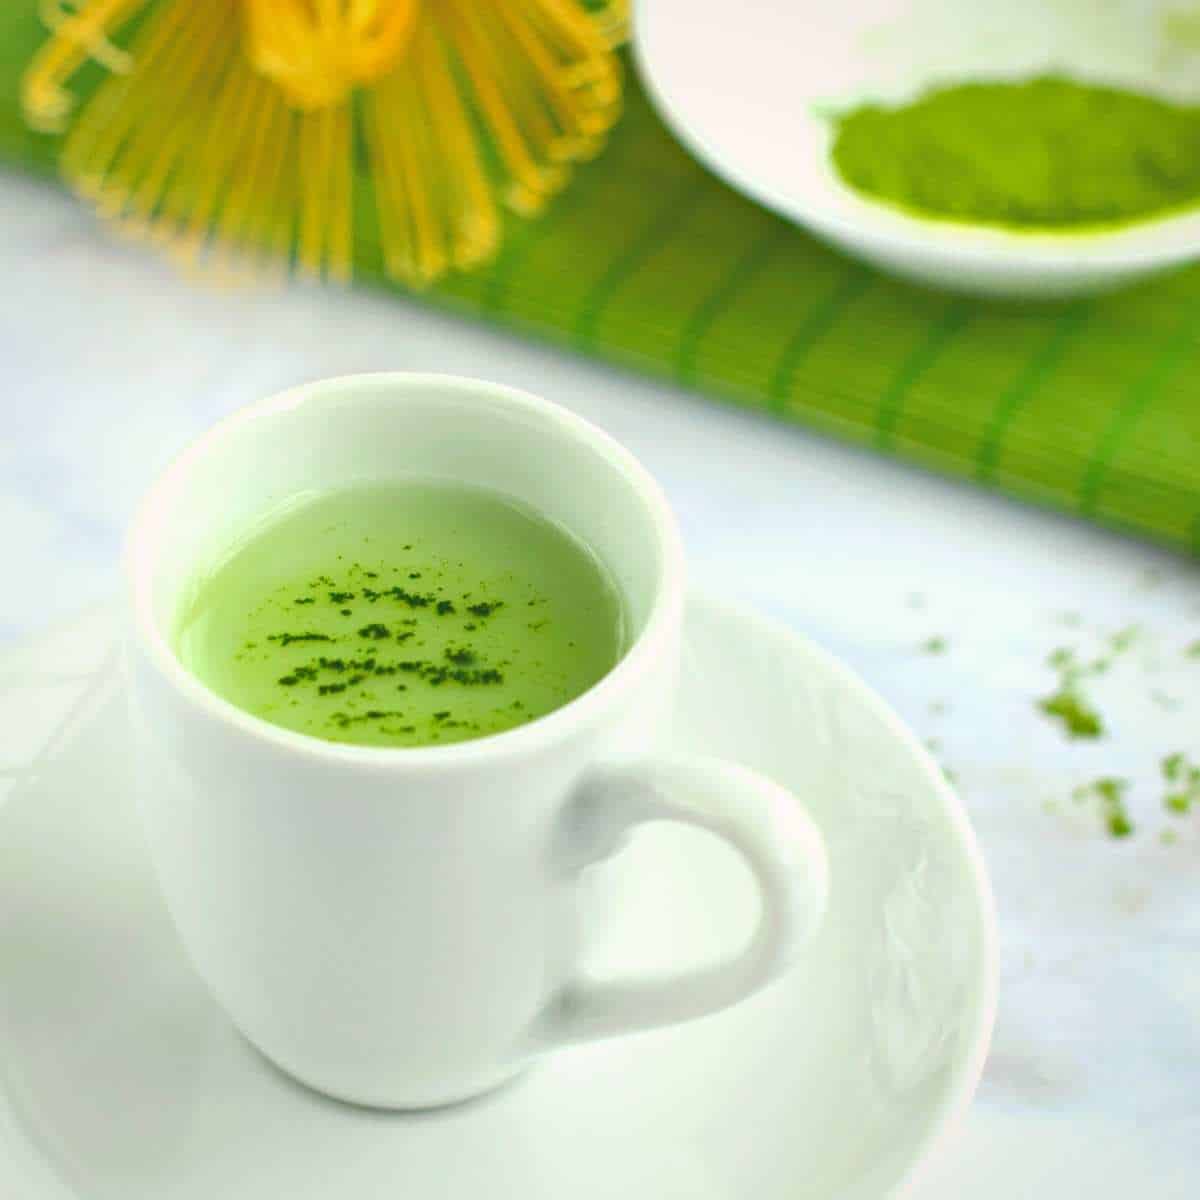 Matcha green tea in a white cup on a white saucer garnished with sprinkled matcha powder on the surface of the tea.